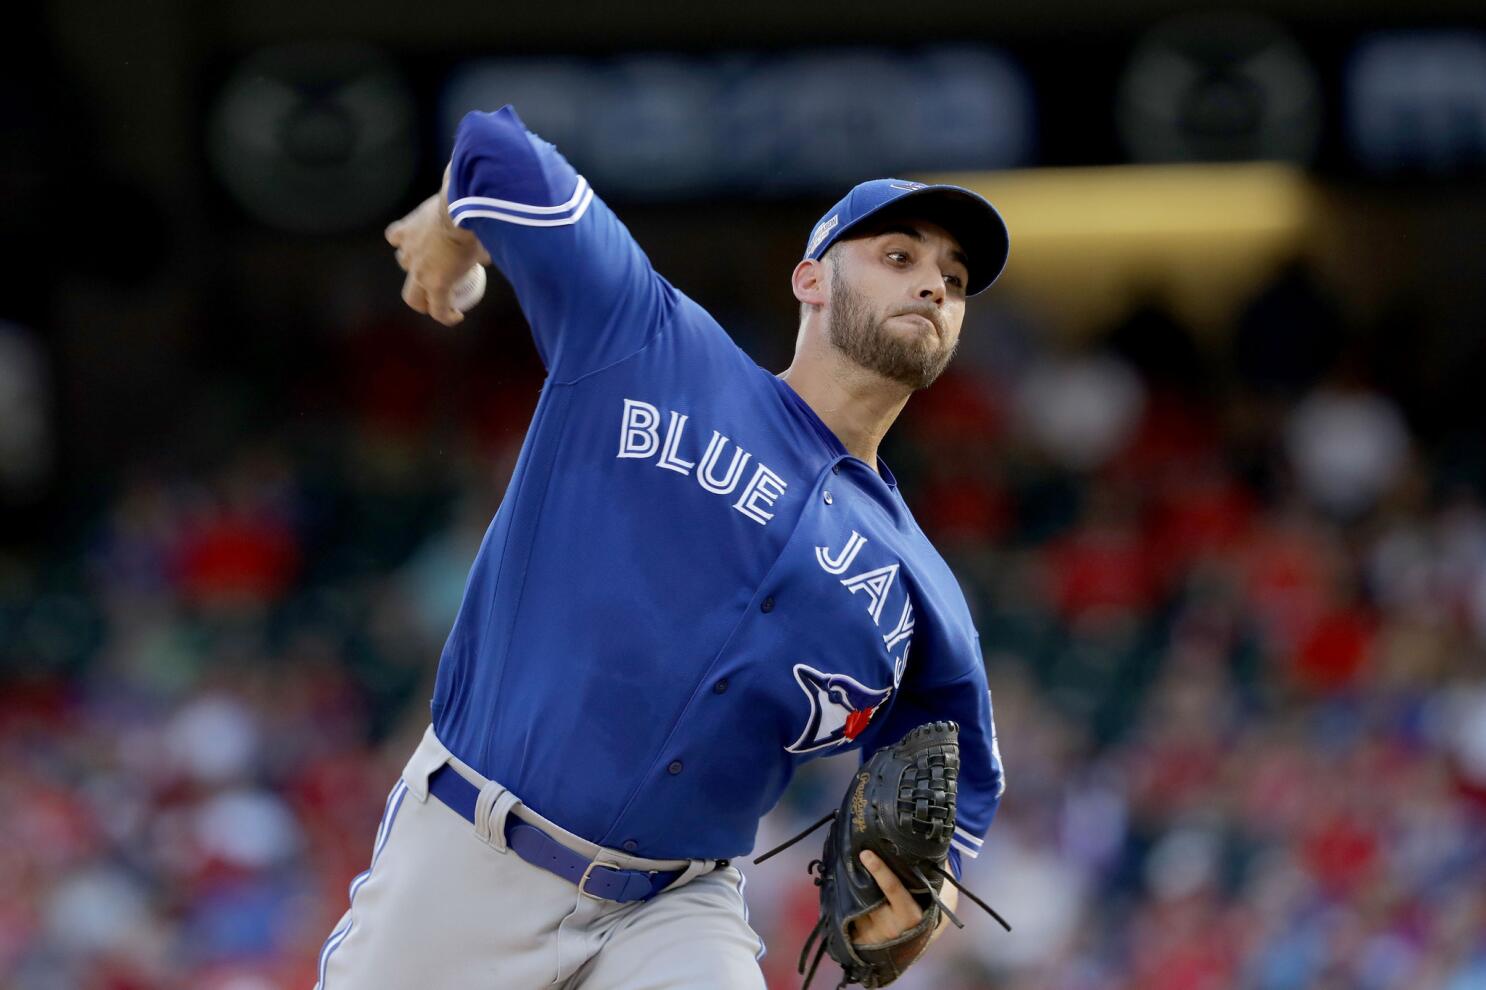 It's just one game': Rangers drop ALDS opener 10-1 to Blue Jays